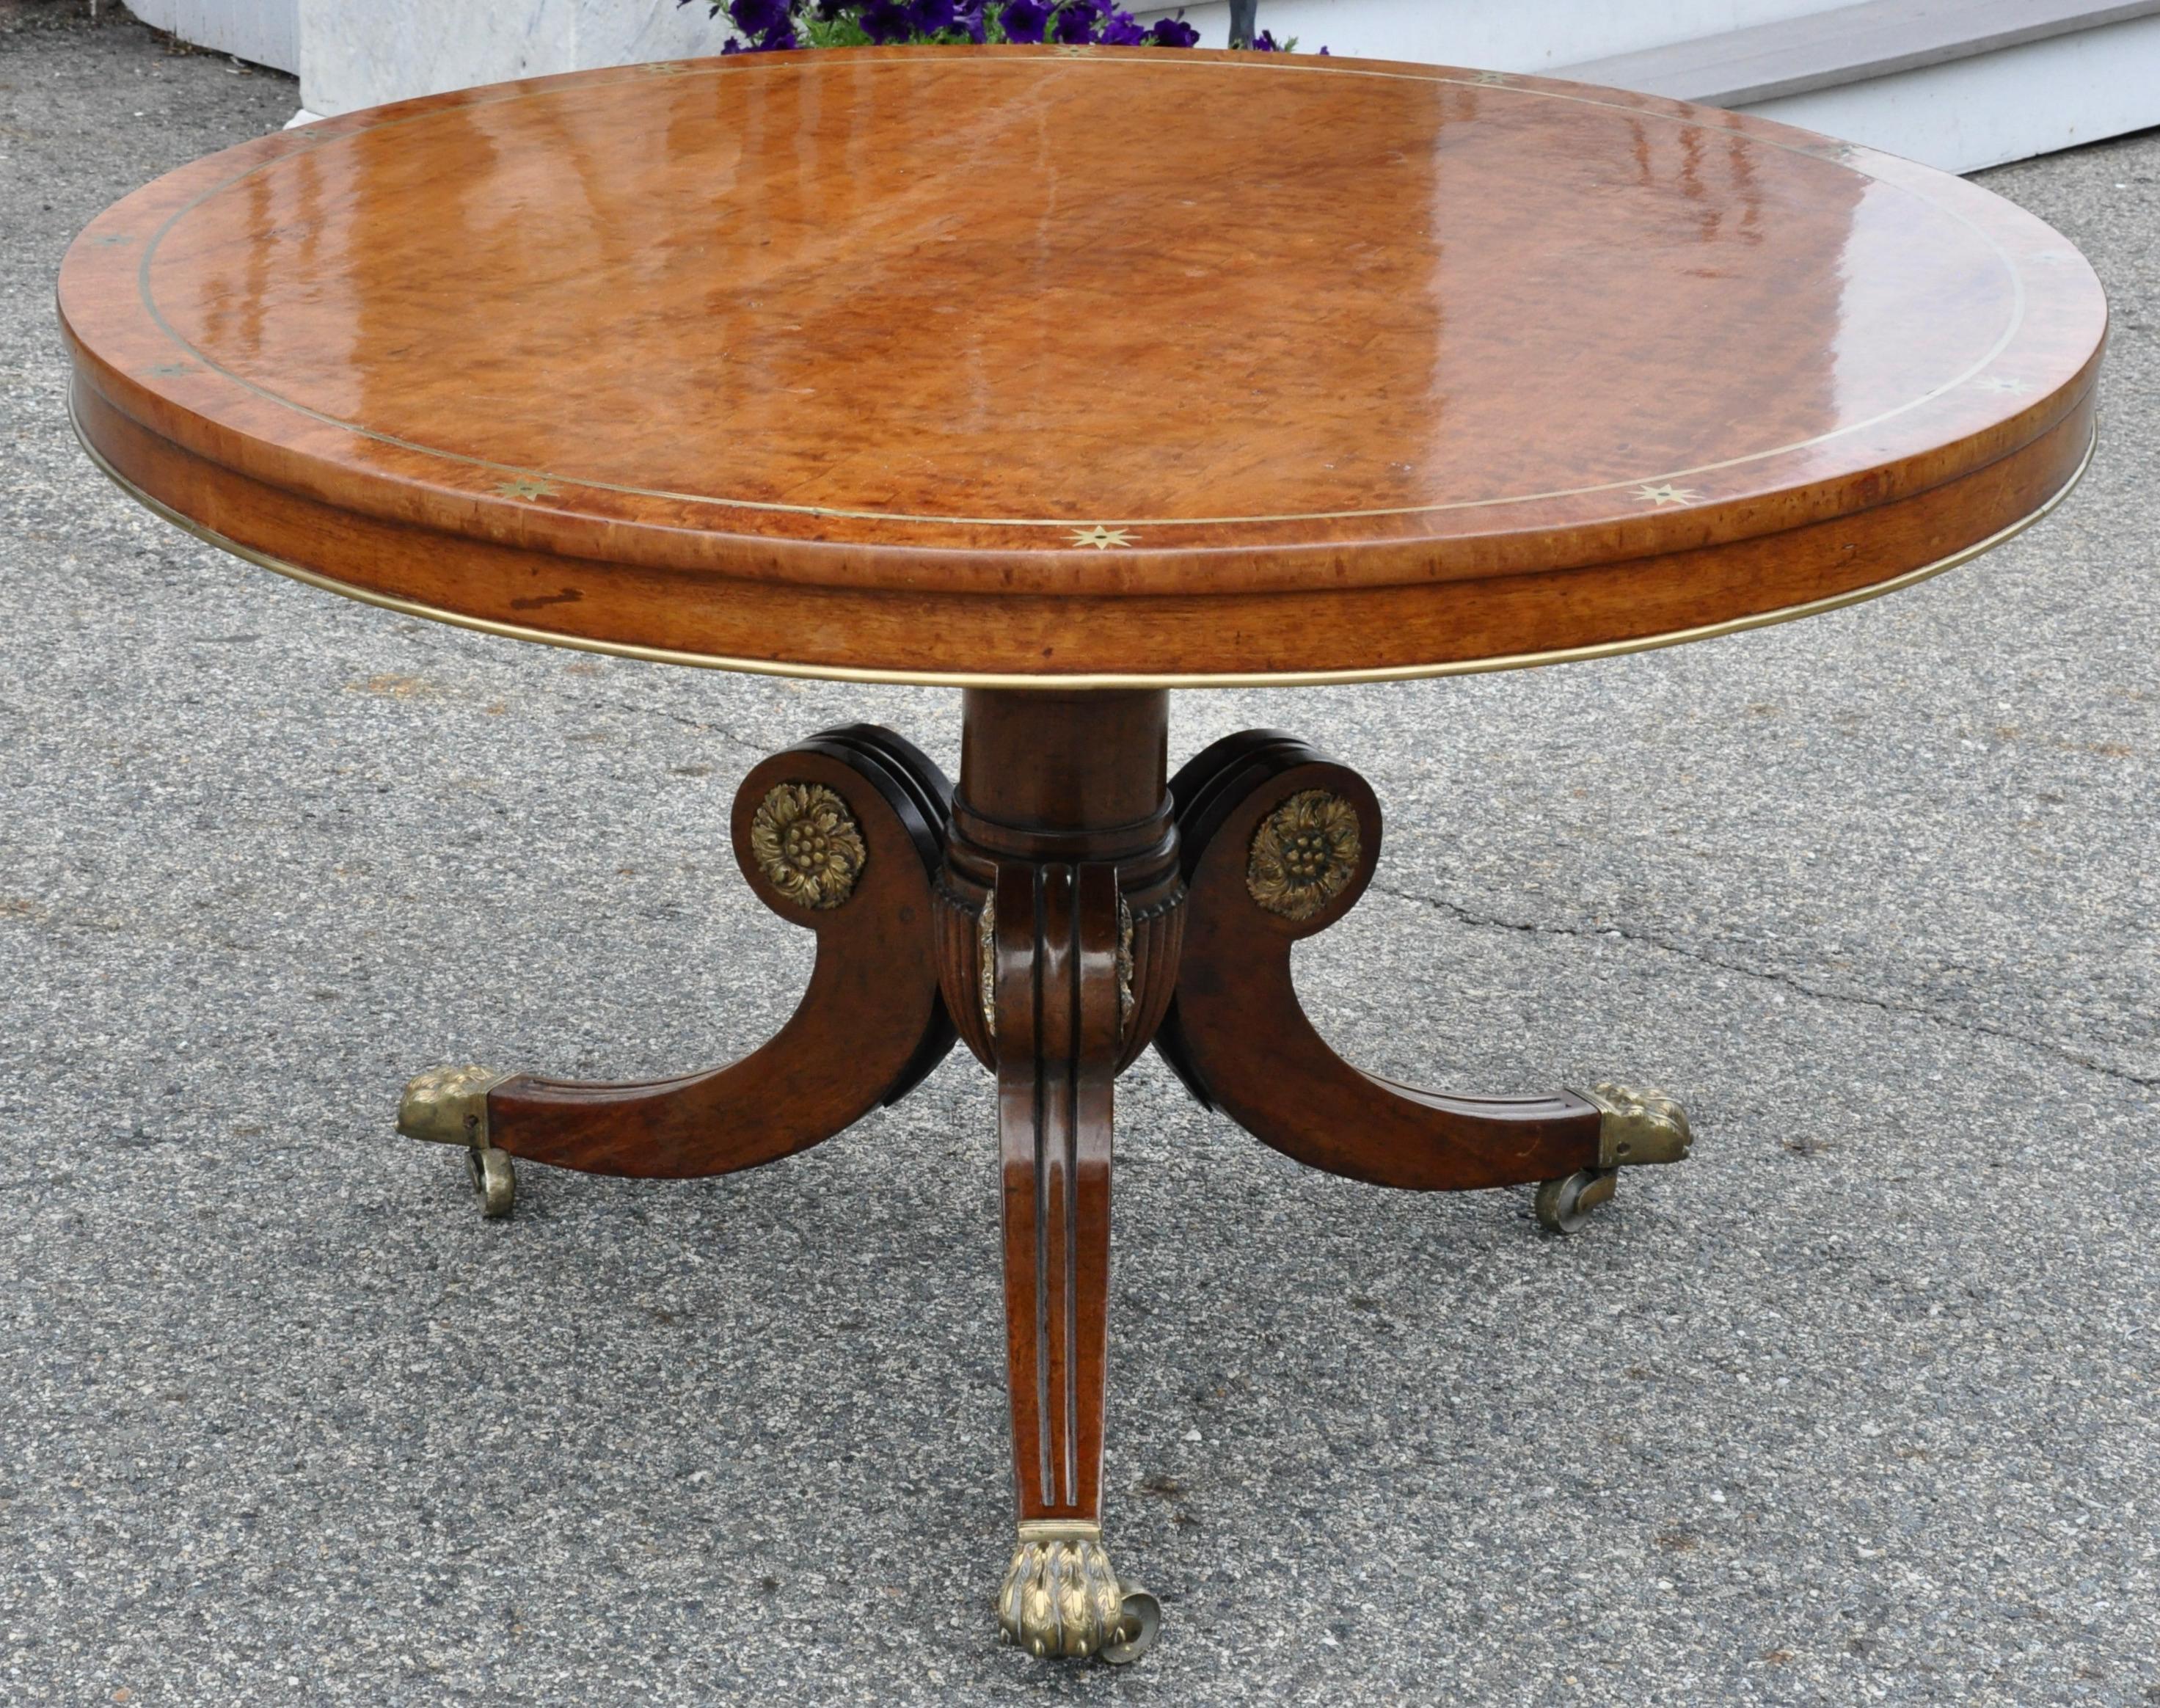 Round English Regency period dining table. Mahogany, cedrela and other colonial wood. Original brass star and ebony inlays. Tilt top mechanism. French polish. Center table.